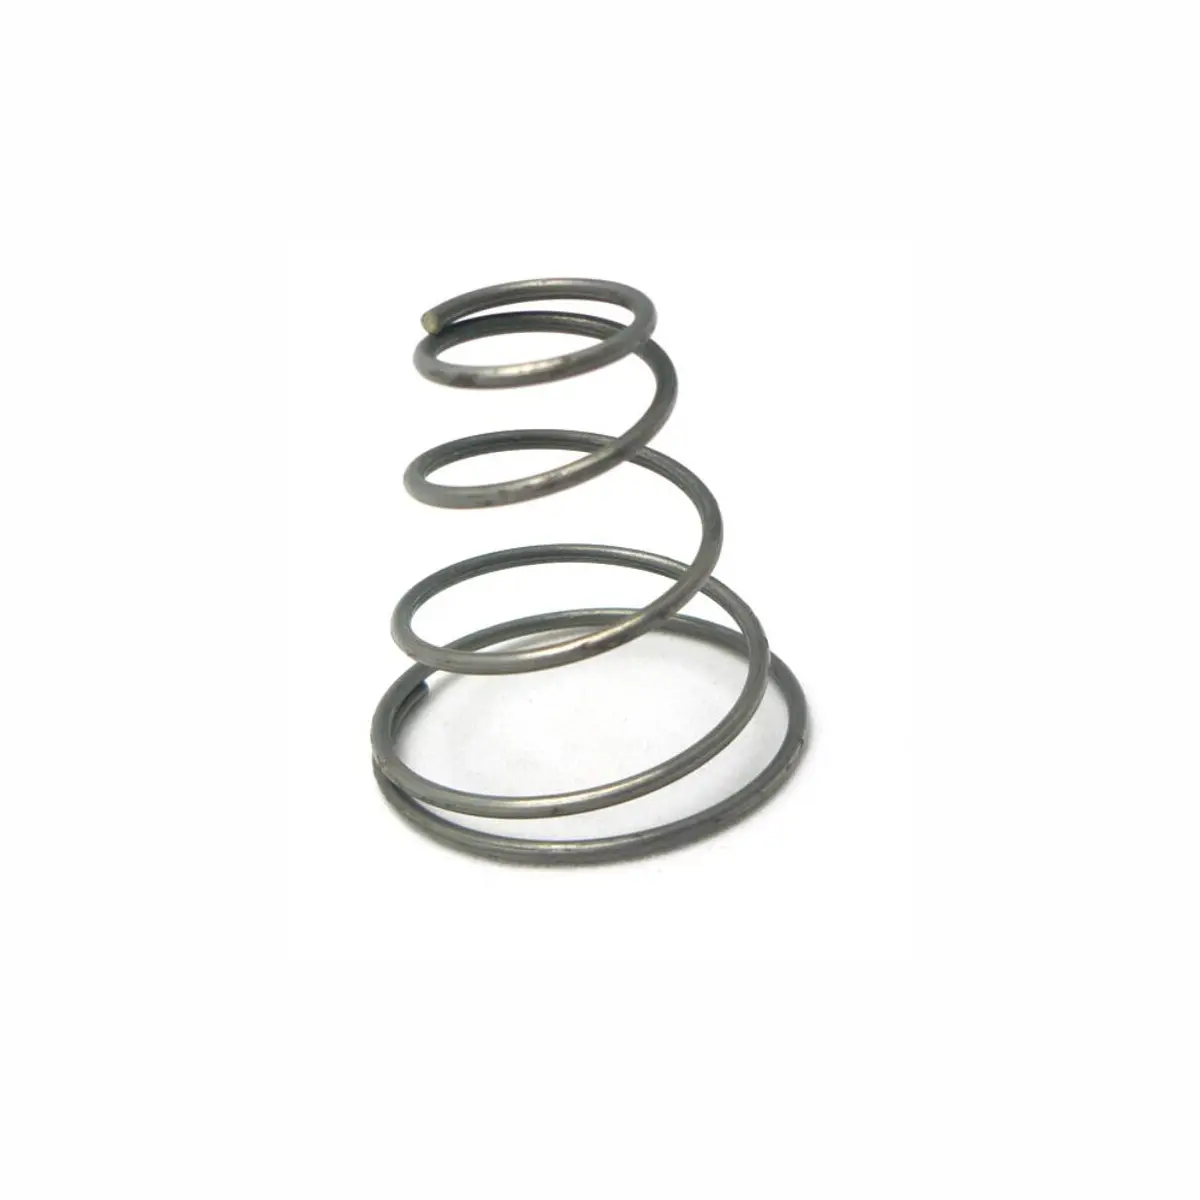 Compression Springs Custom Compression Conical Springs High Precision Stainless Steel Small Springs